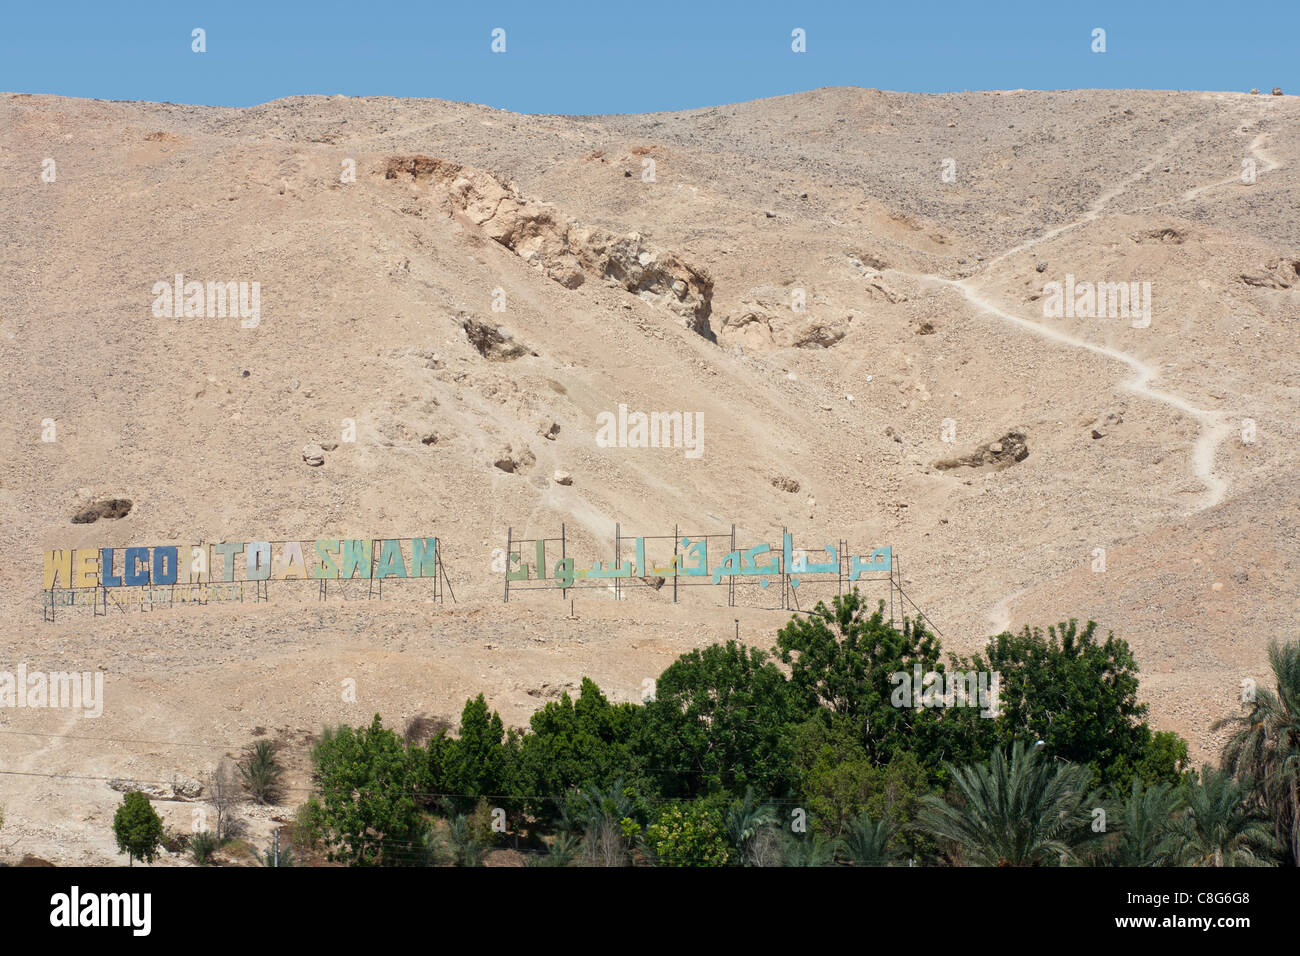 Welcome sign 'Hollywood' style with palms in front on the mountains at Sharona on the Aswan Luxor protectorate border, Egypt Stock Photo